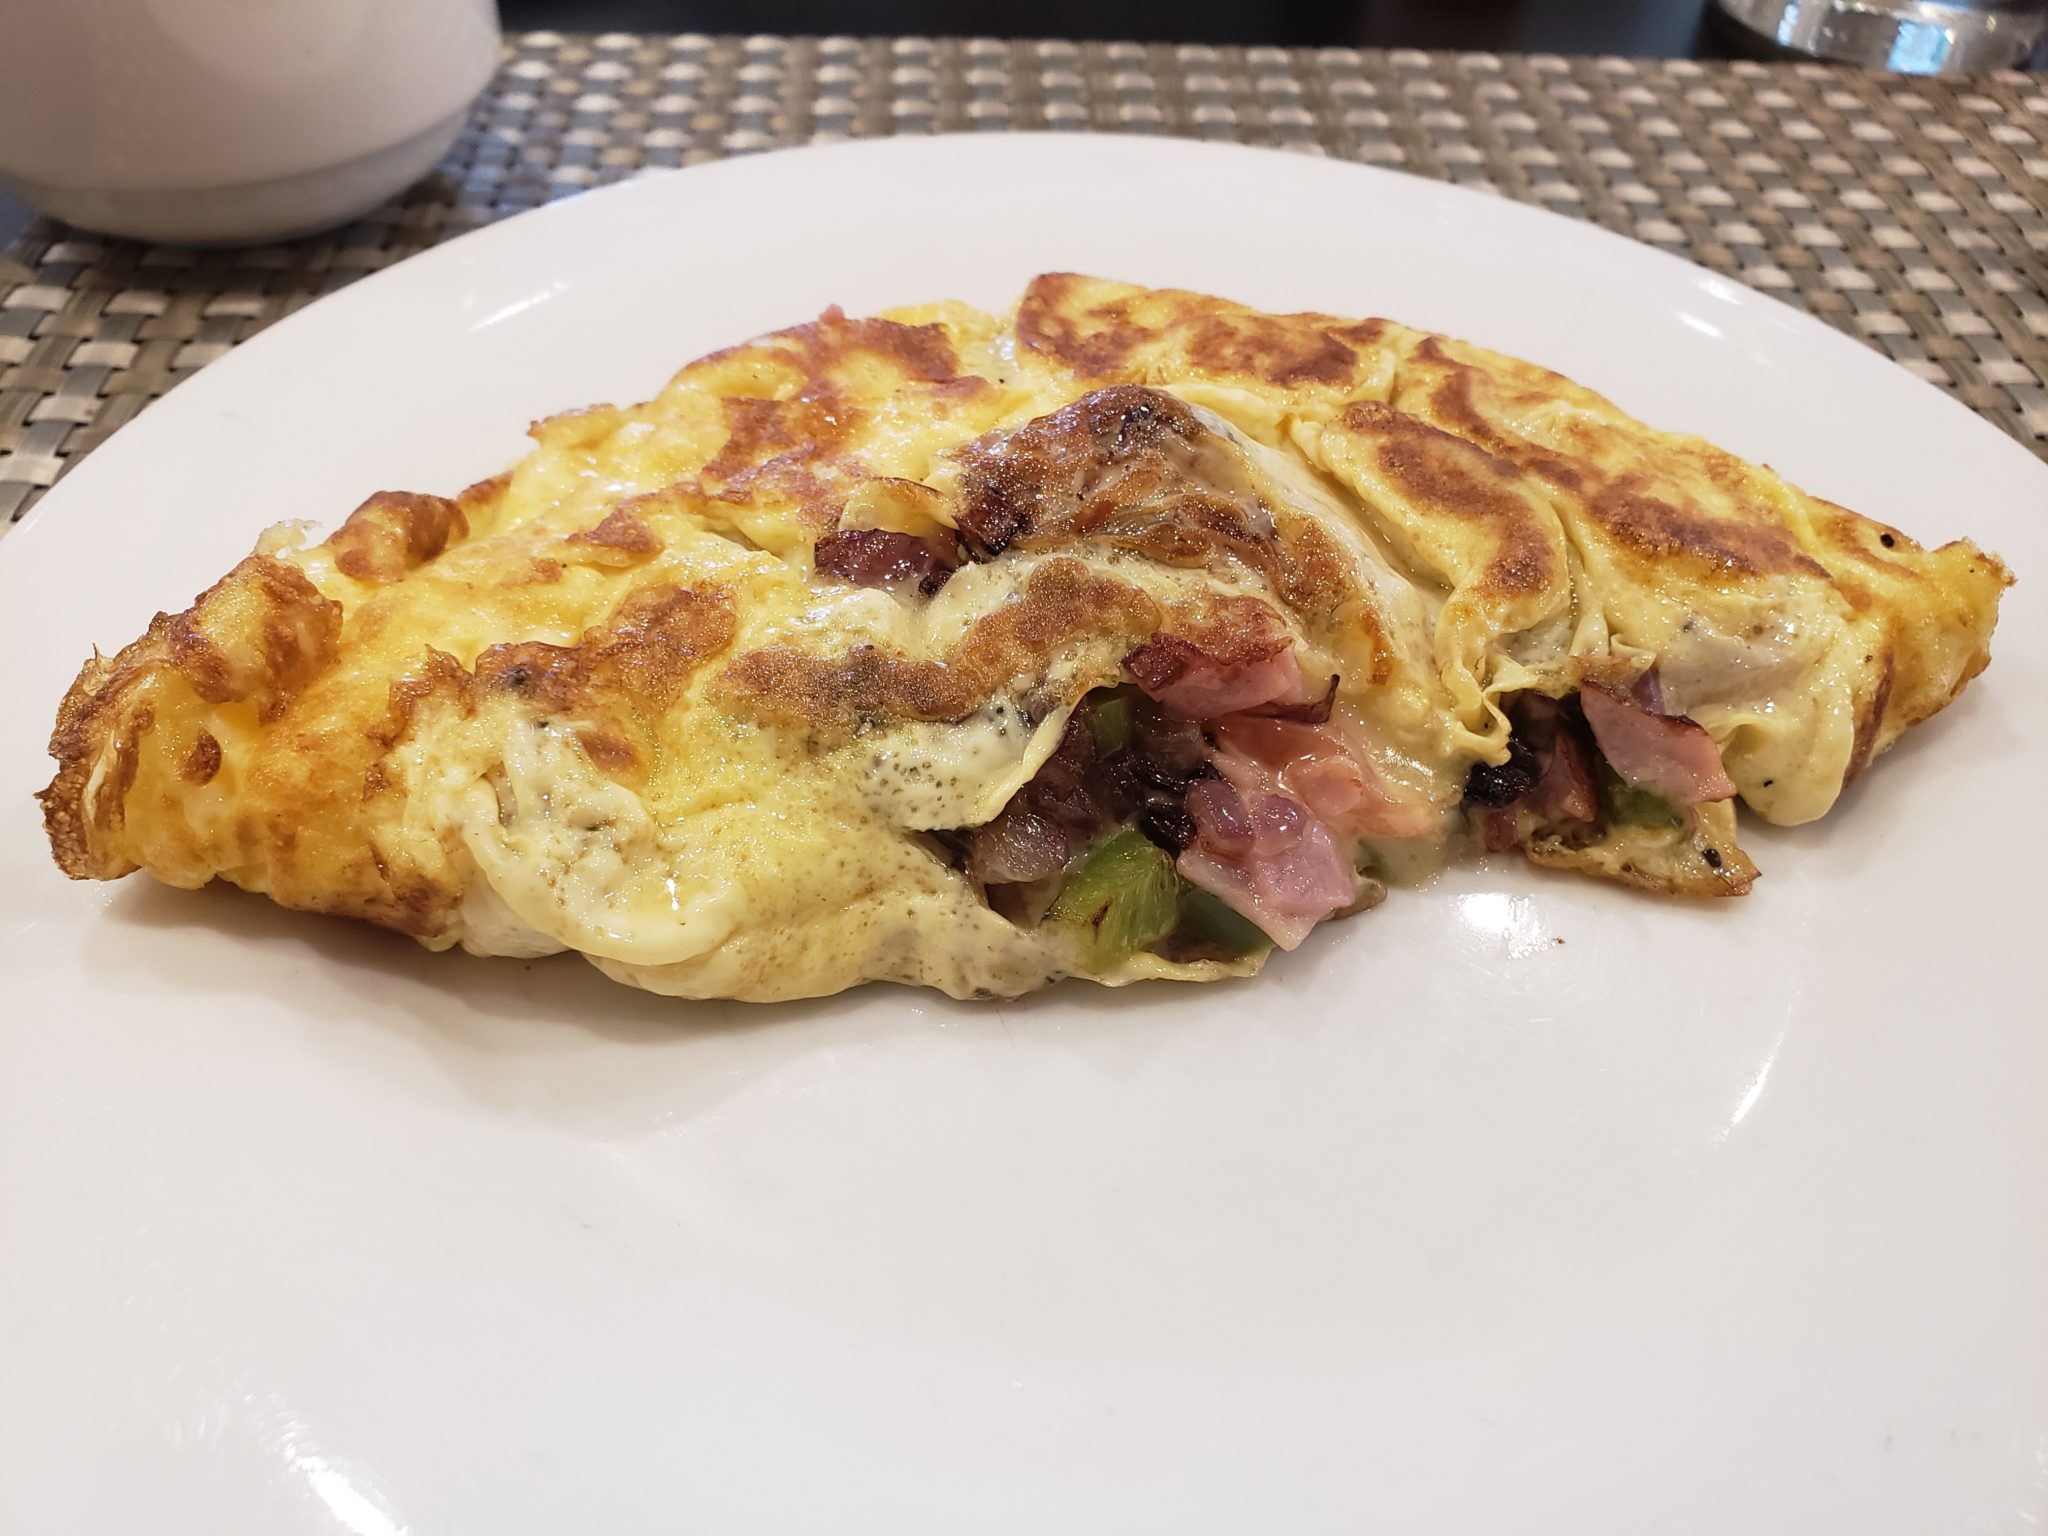 a omelette on a plate